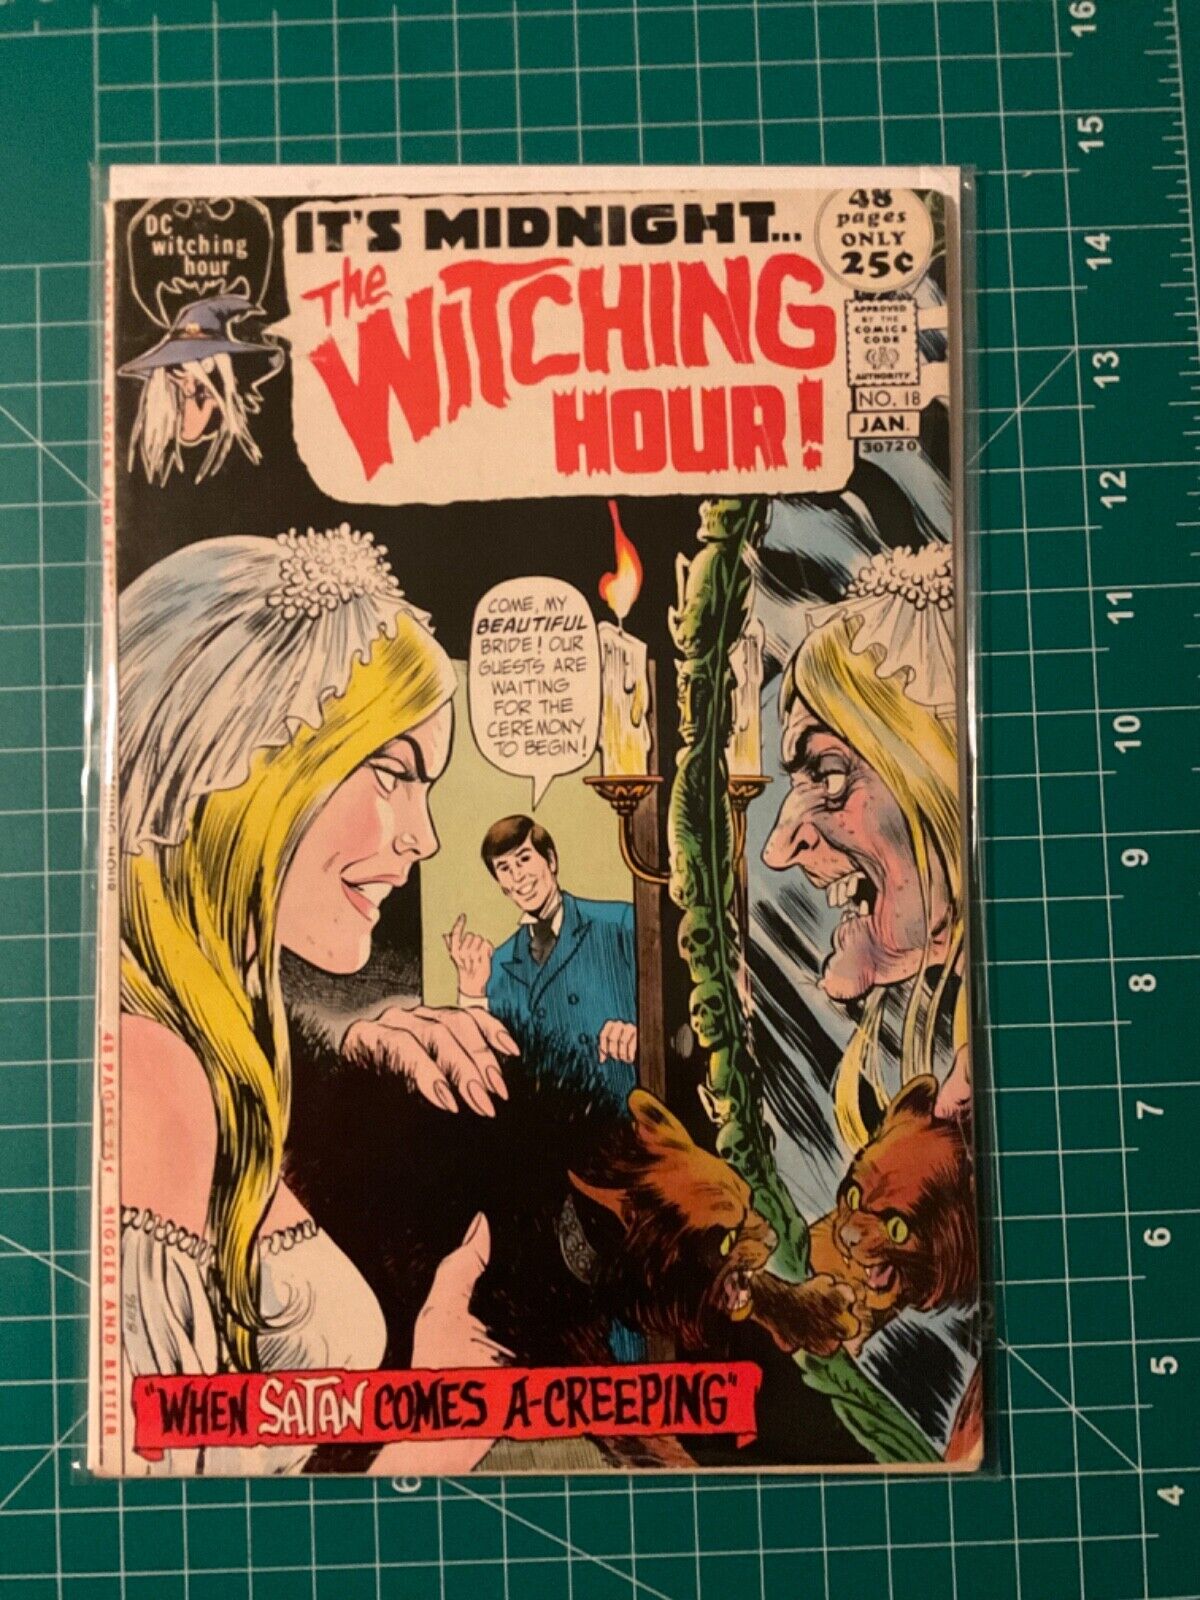 THE WITCHING HOUR #18 1972 DC COMICS BRONZE AGE GIANT SIZE